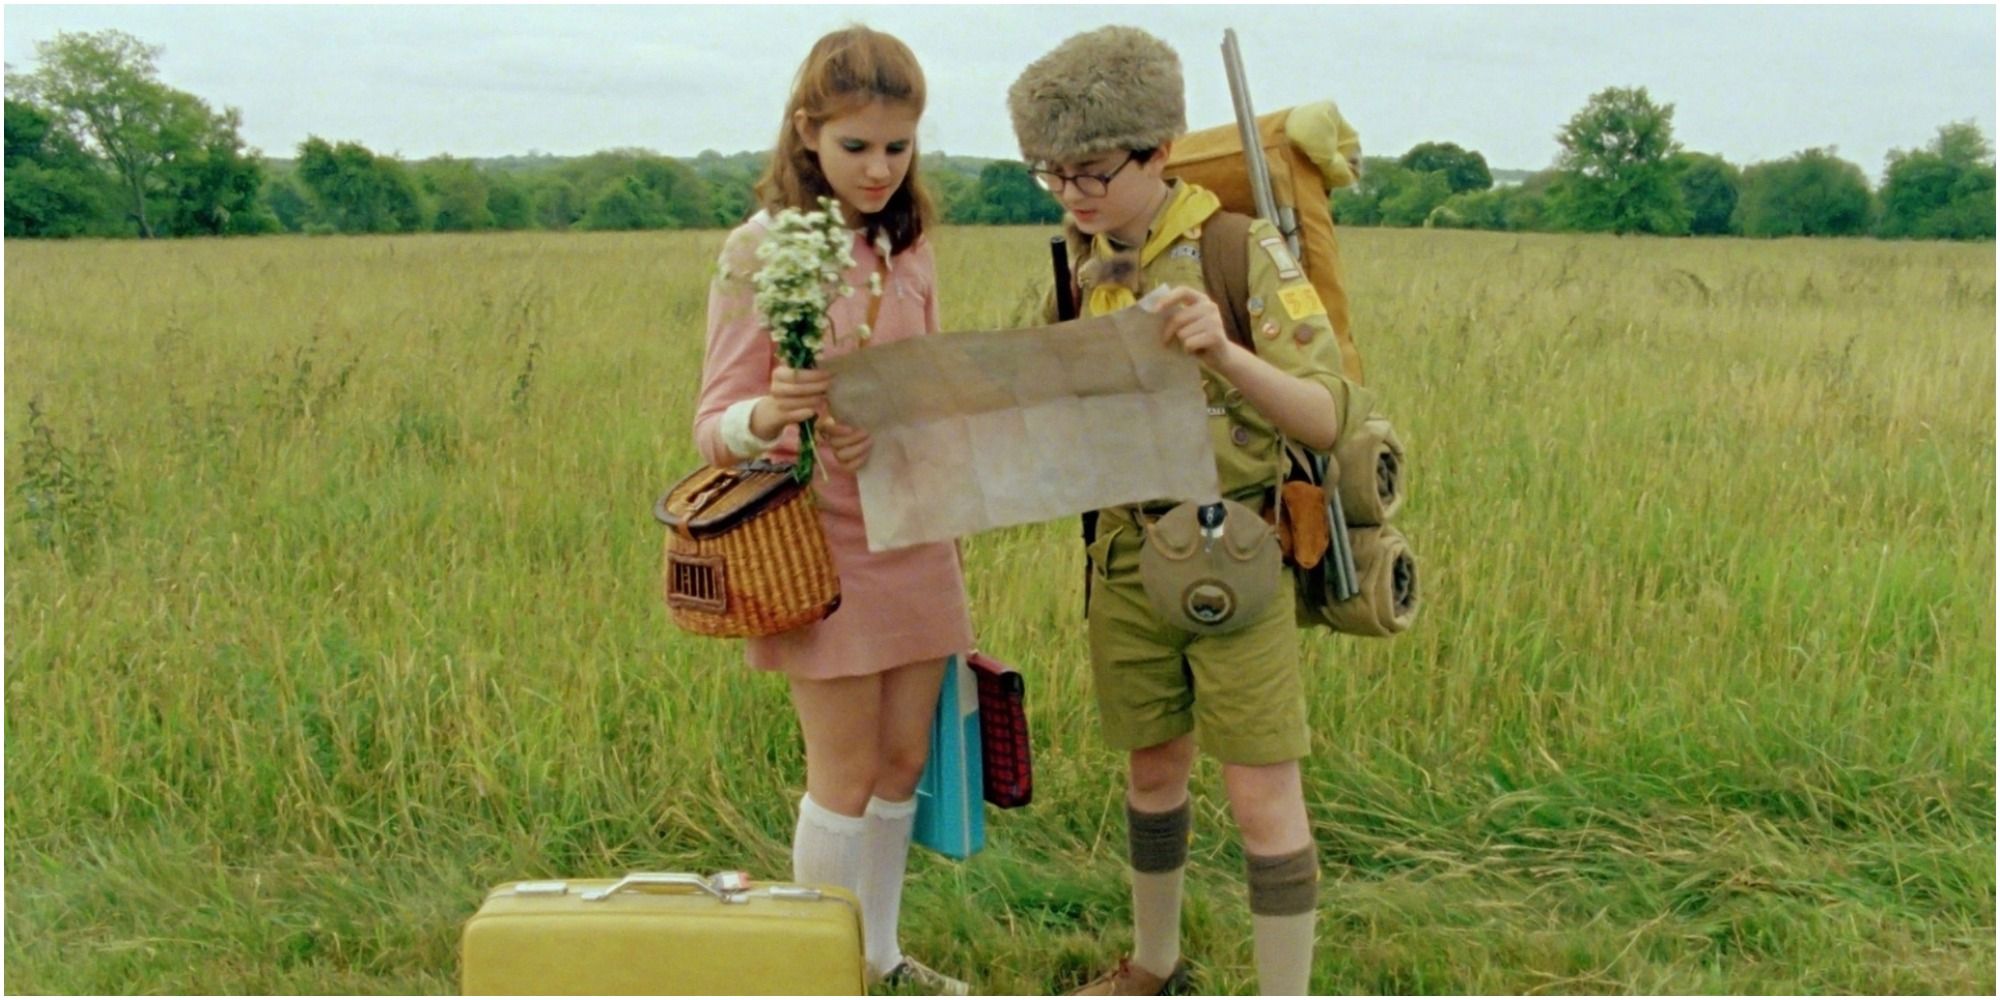 Suzy and Sam consult a map in Moonrise Kingdom